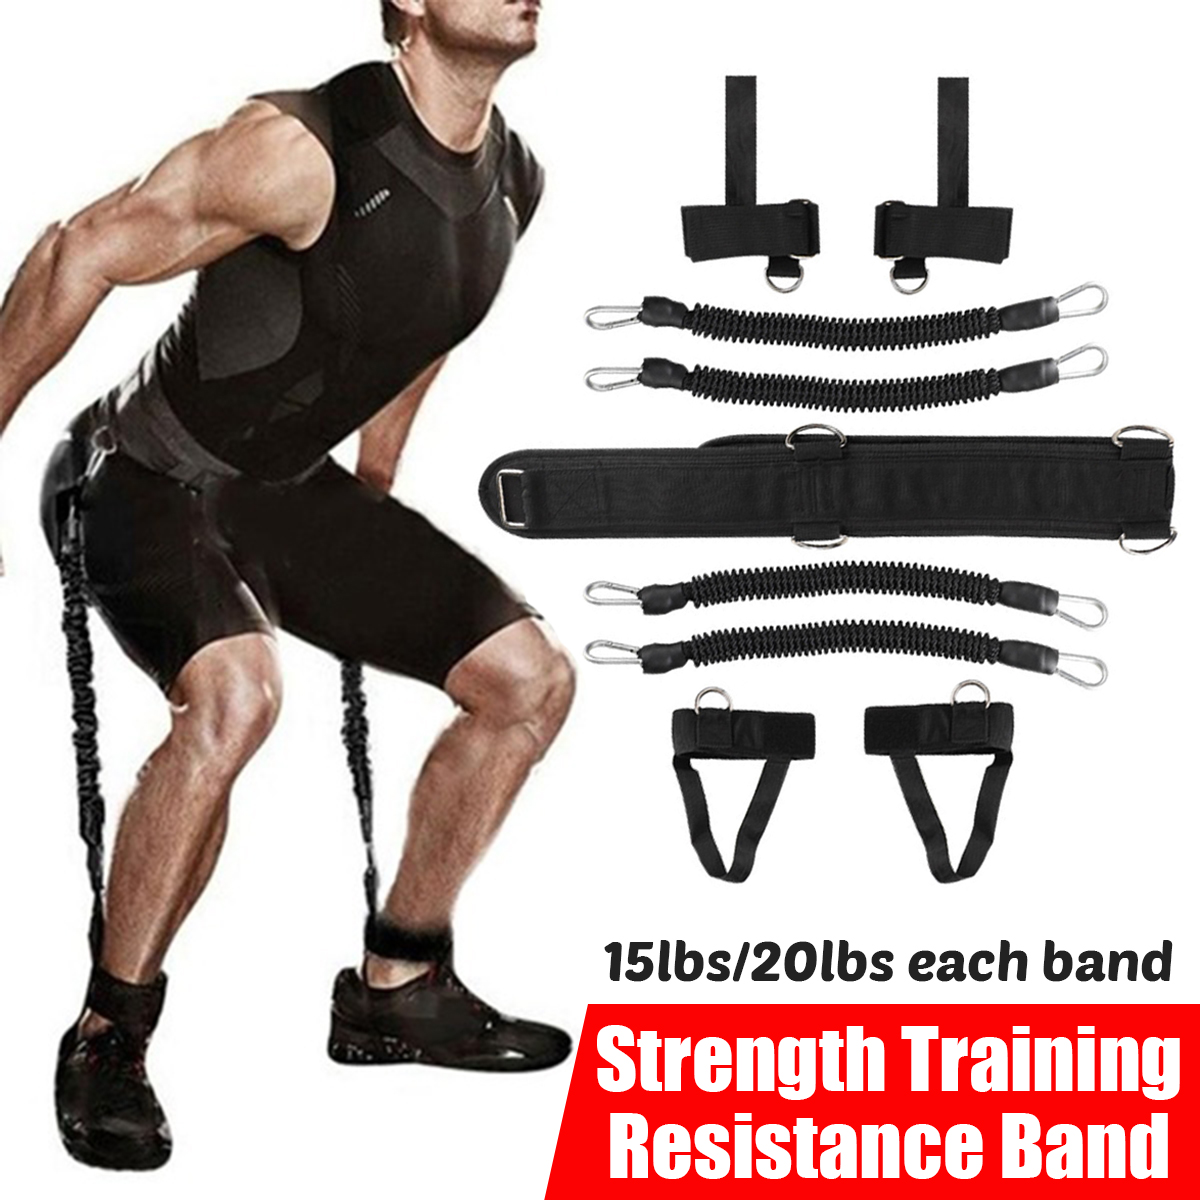 Home-Gym-Strength-Training-Resistance-Band-Basketball-Strength-Exercise-Pull-Rope-Boxing-Sports-Fitn-1792138-1